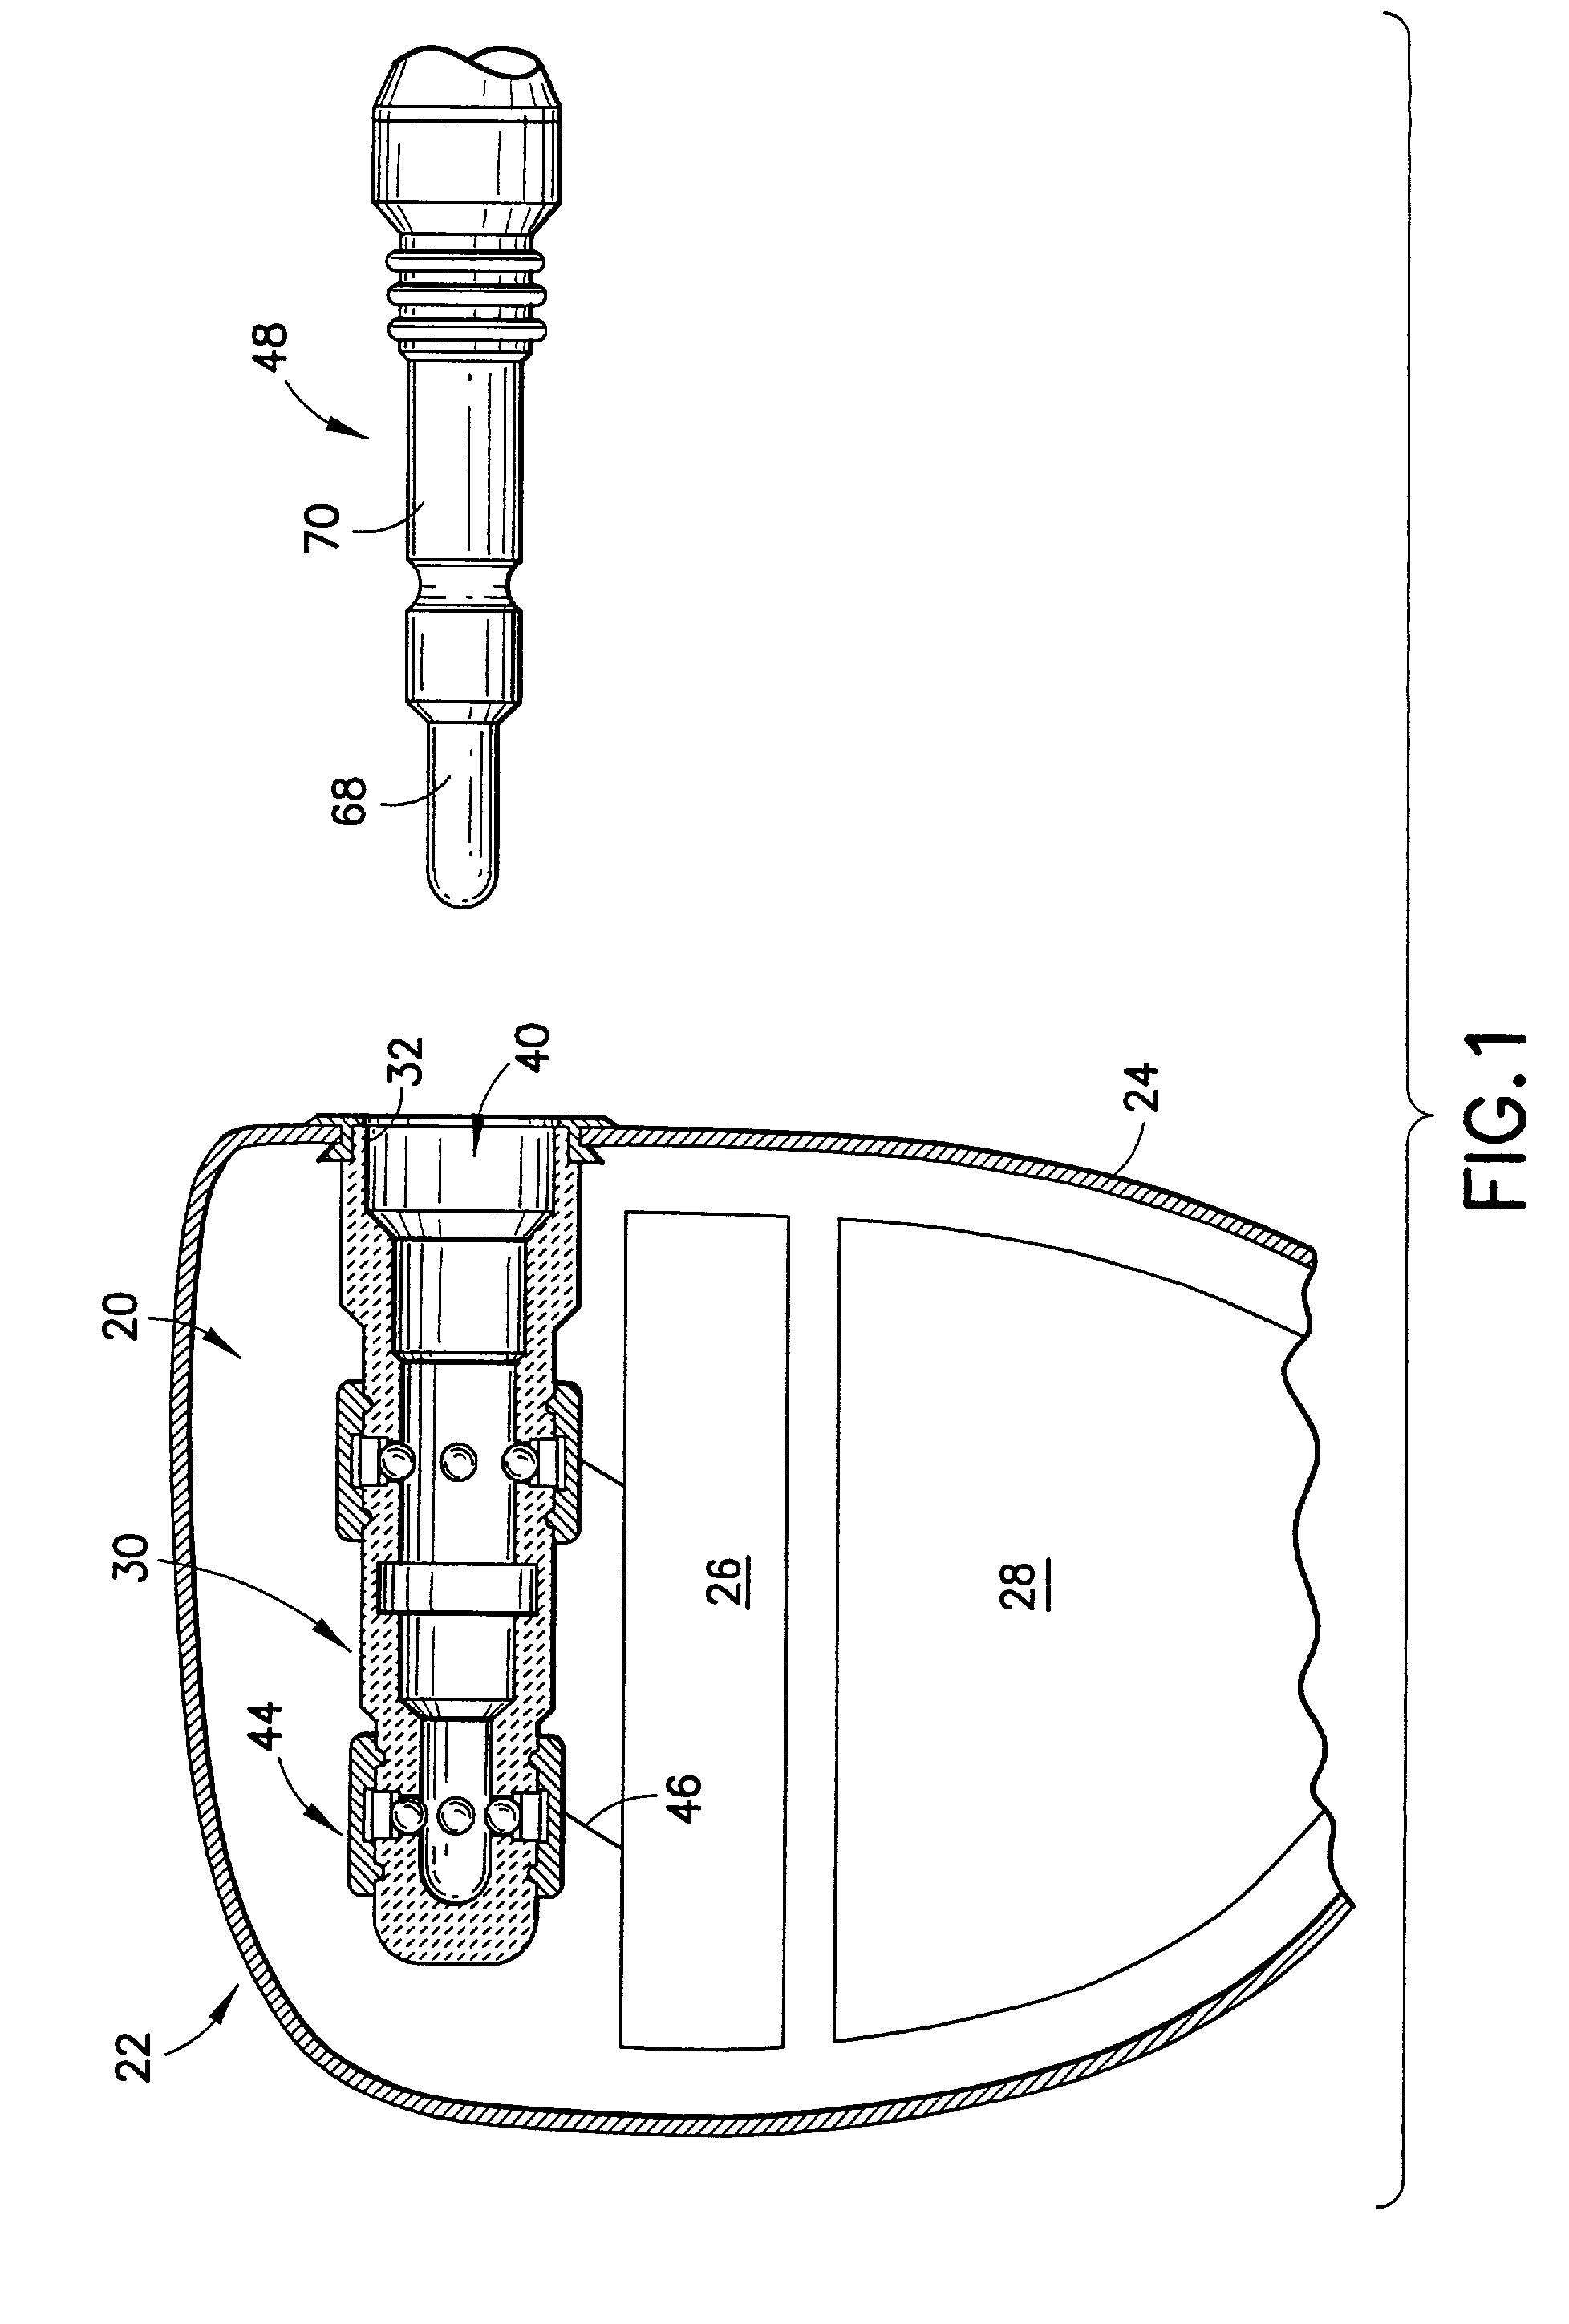 Hermetically sealed feedthrough connector using shape memory alloy for implantable medical device